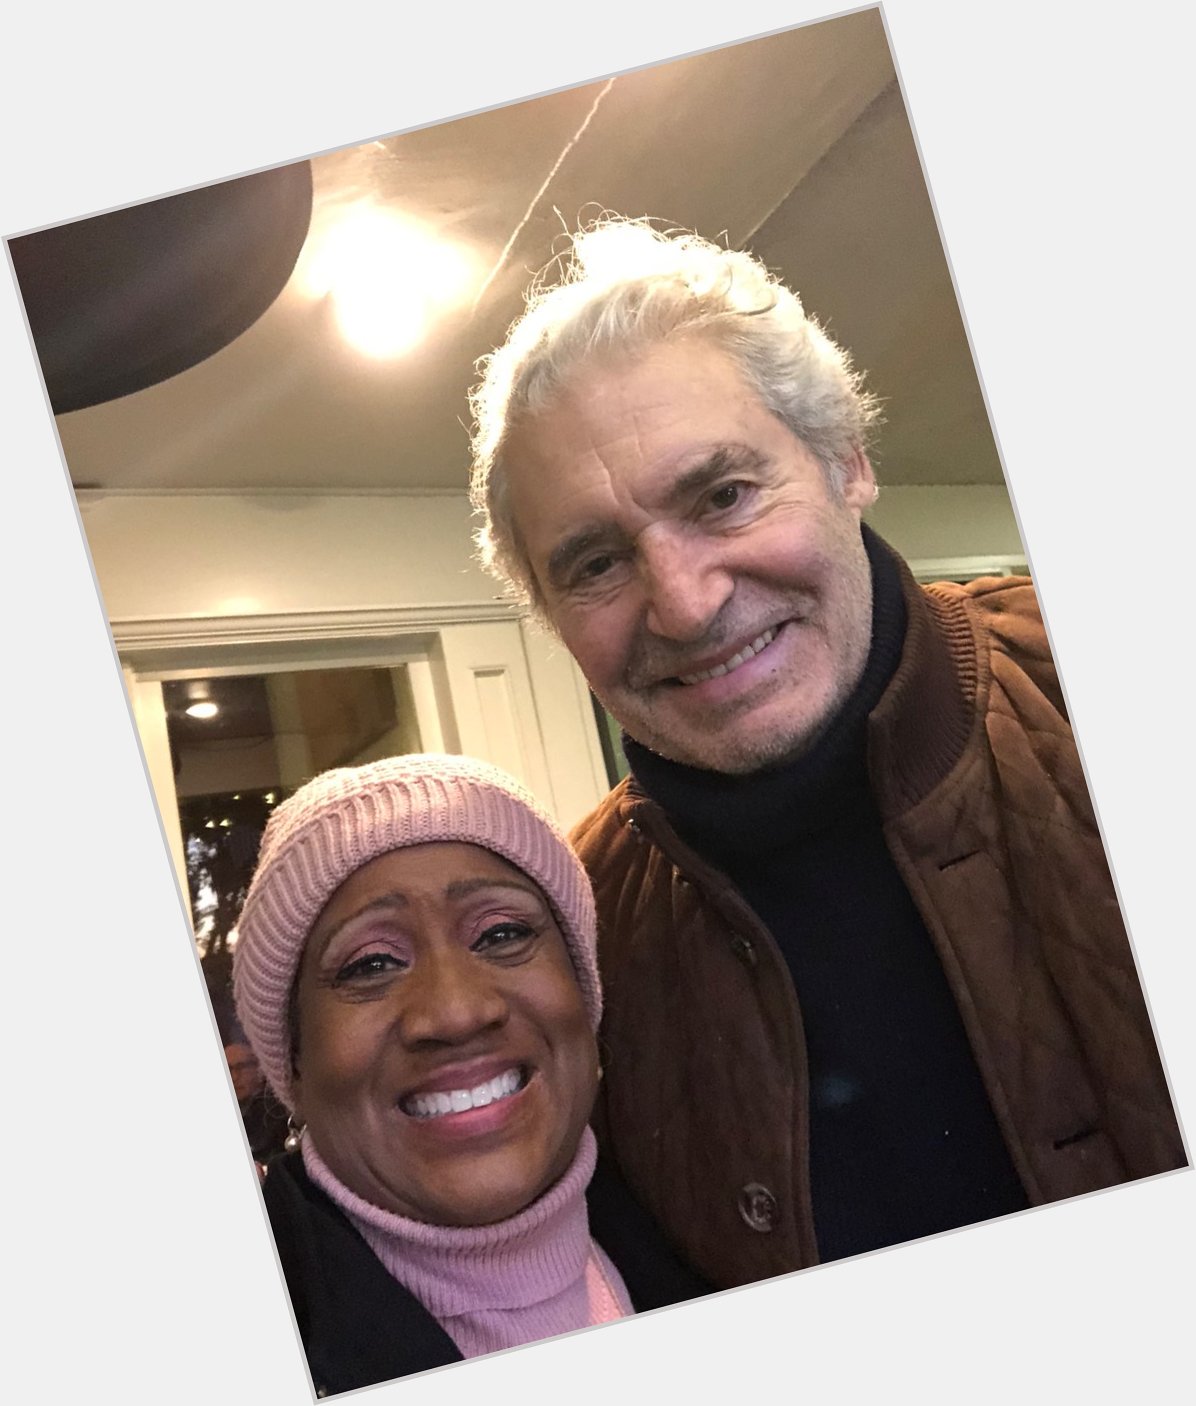 I met Mr. Michael Nouri last night! What a handsome and approachable guy! Happy belated birthday! 